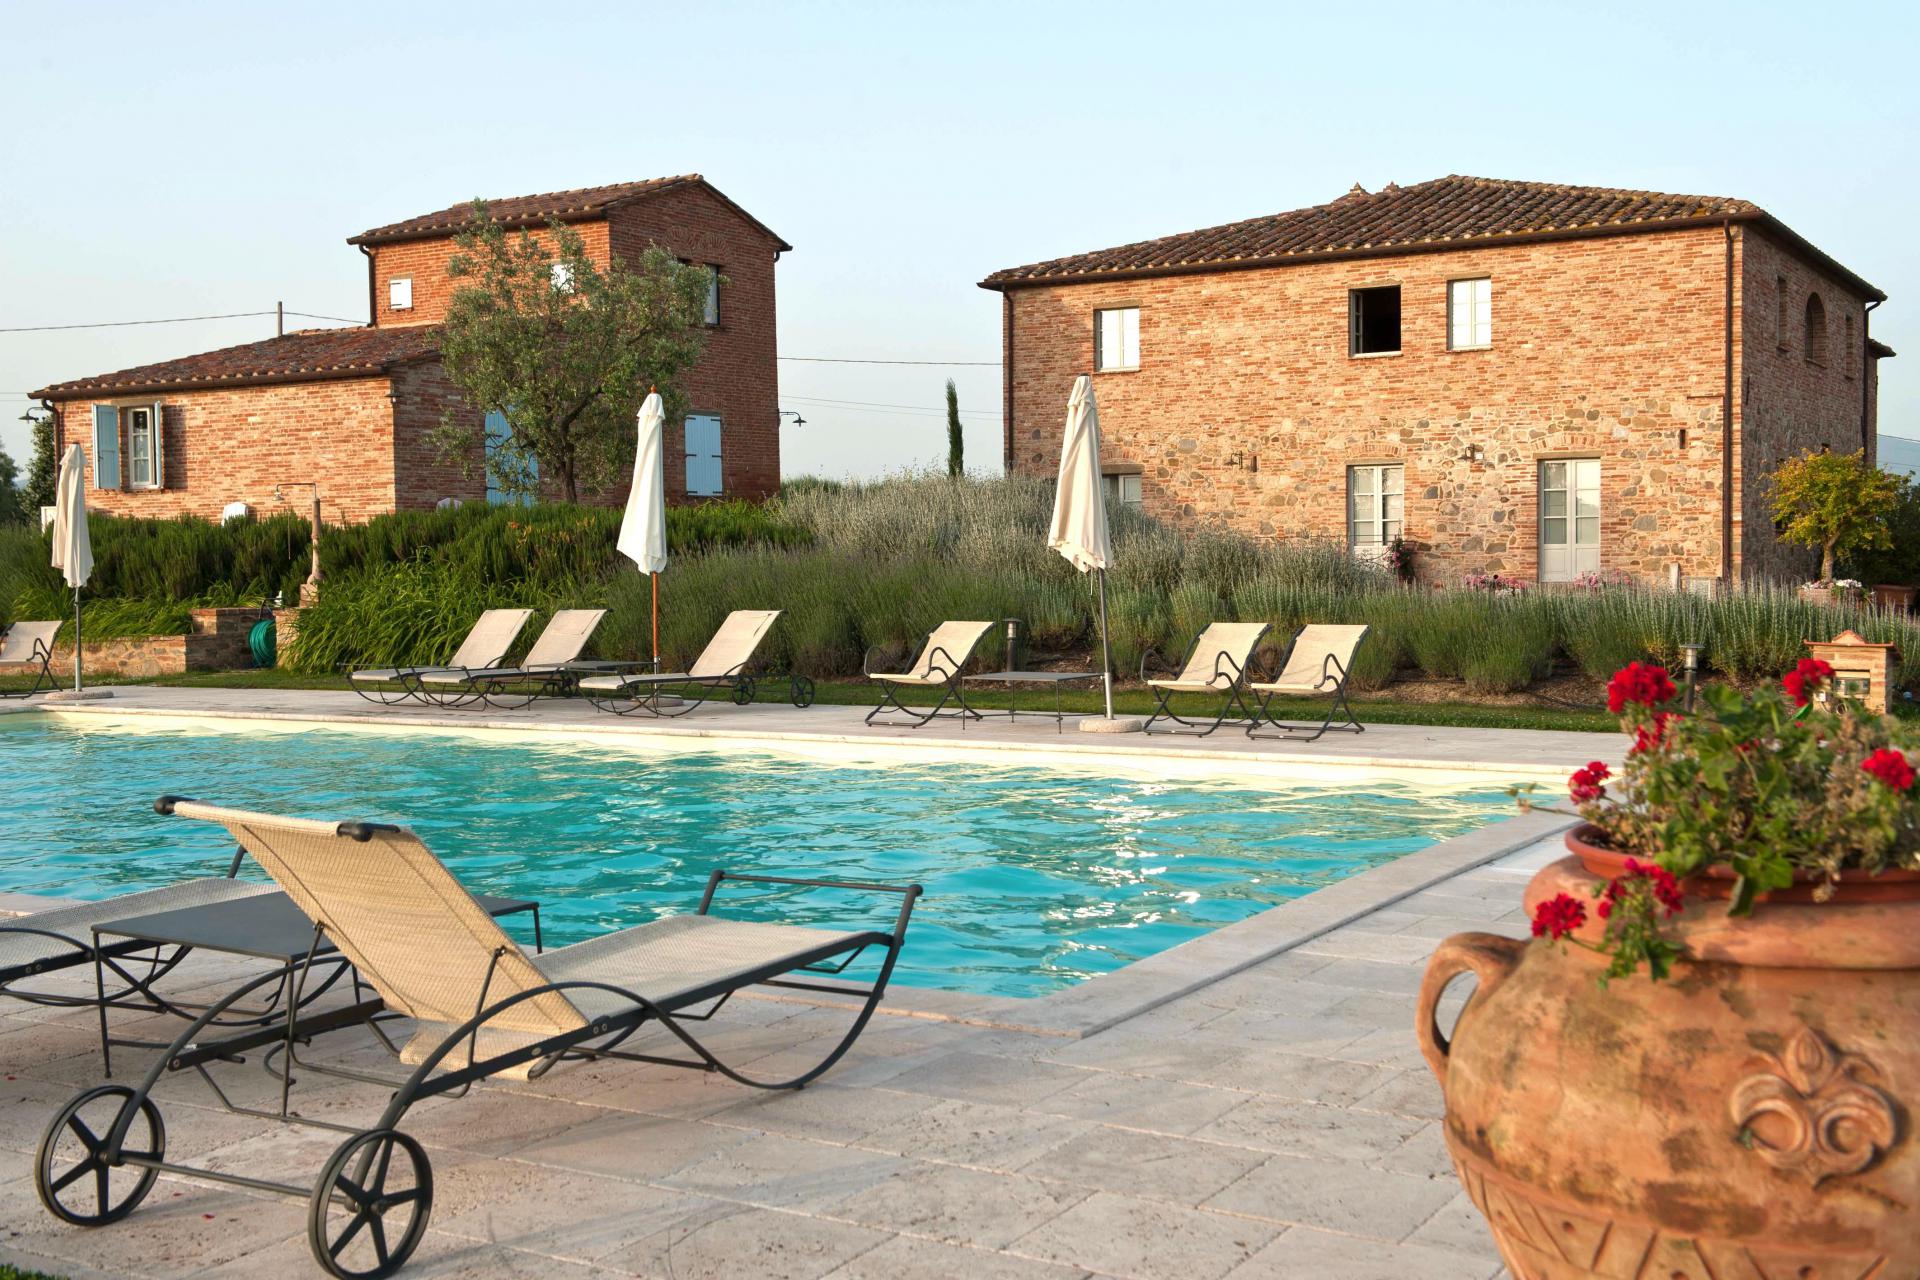 Relaxation and culinary delights in Tuscany